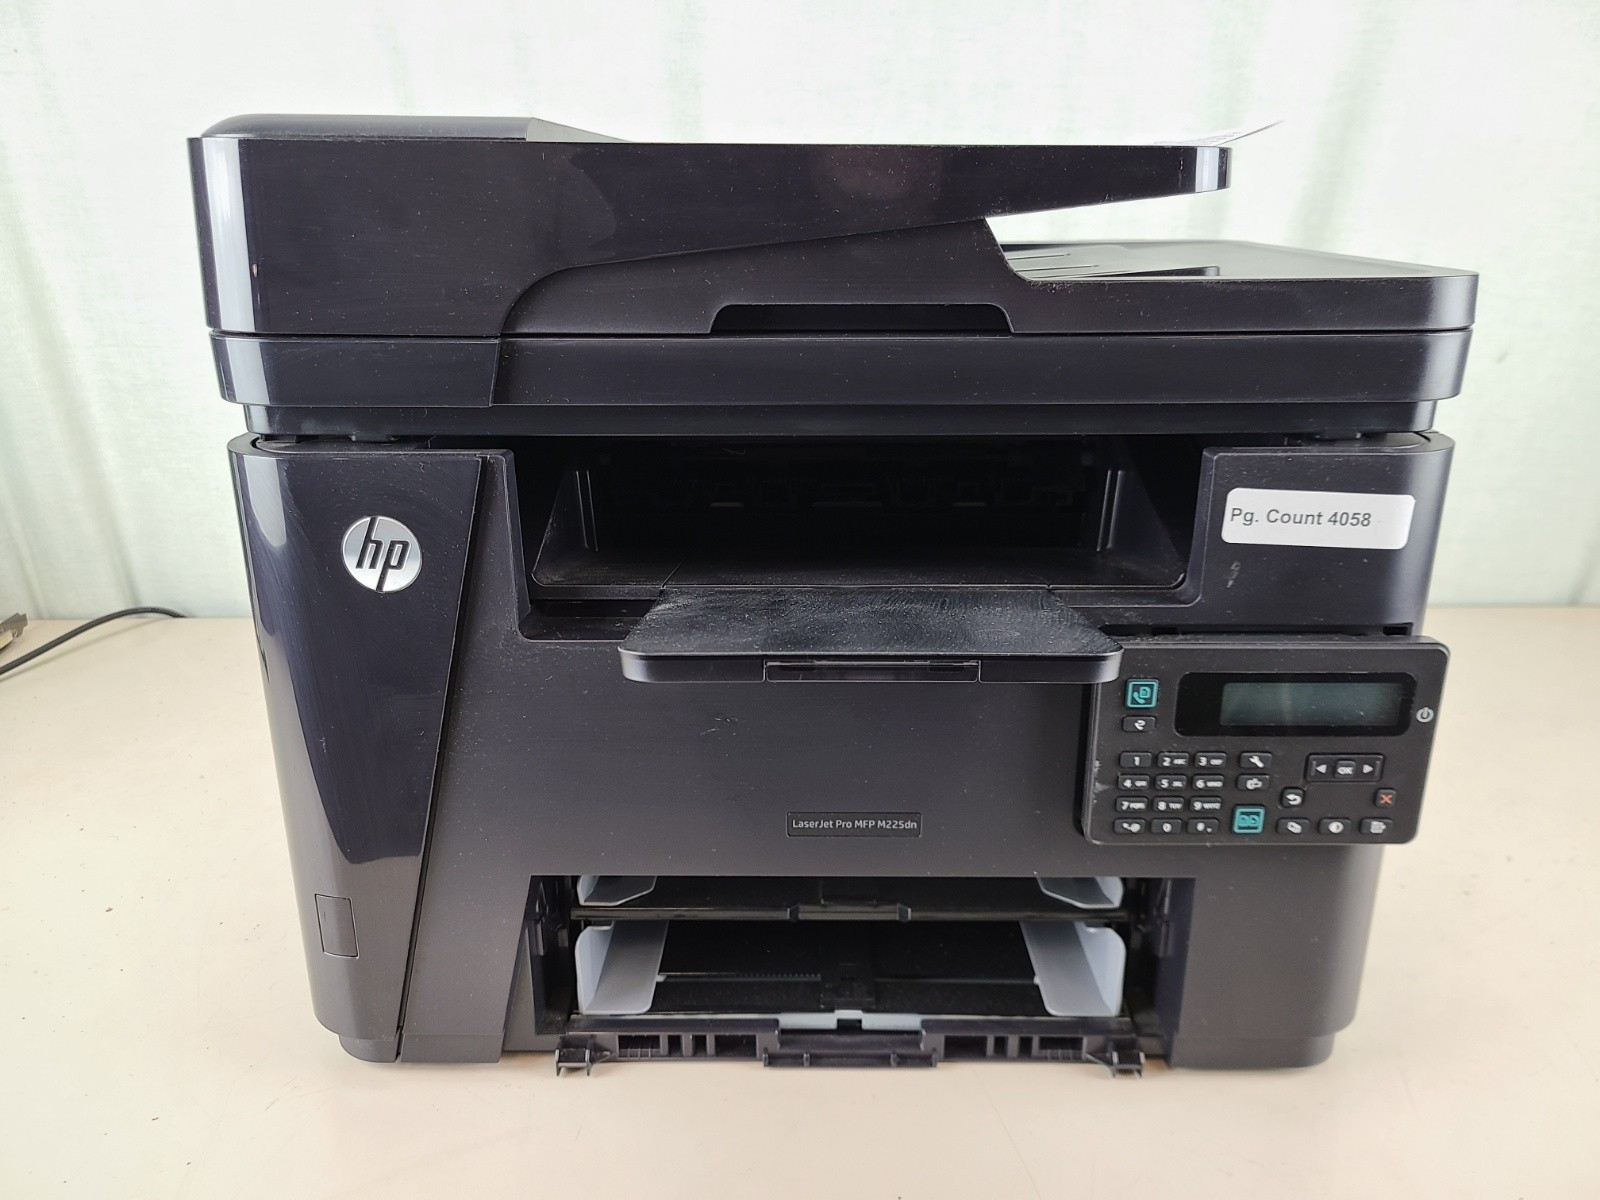 HP Laserjet Pro MFP M225dn Printer AS-IS 4058 Pages